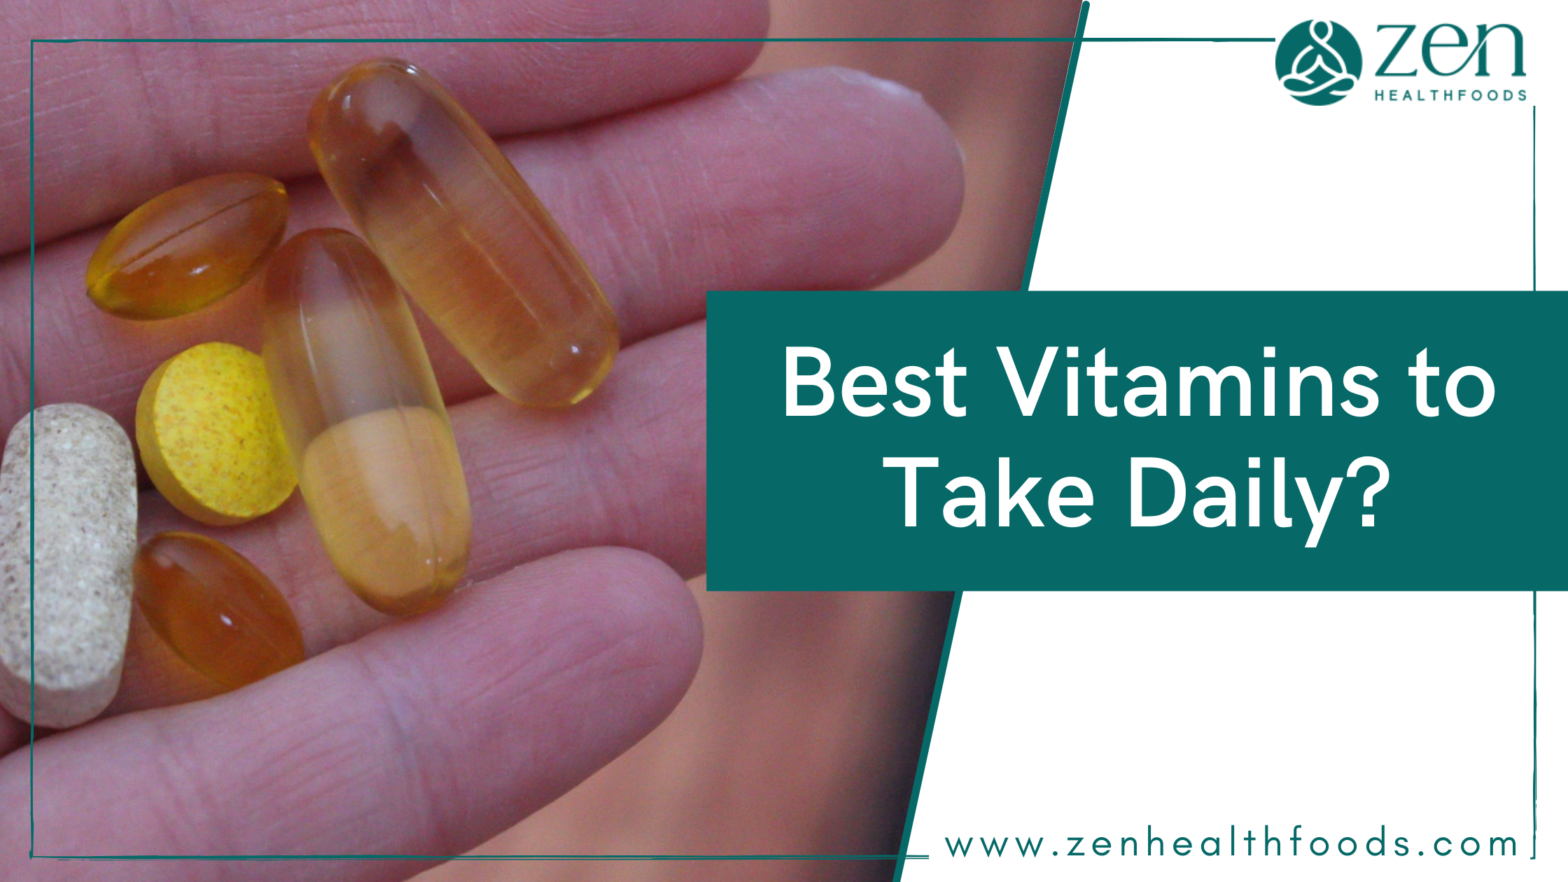 Best Vitamins to Take Daily?